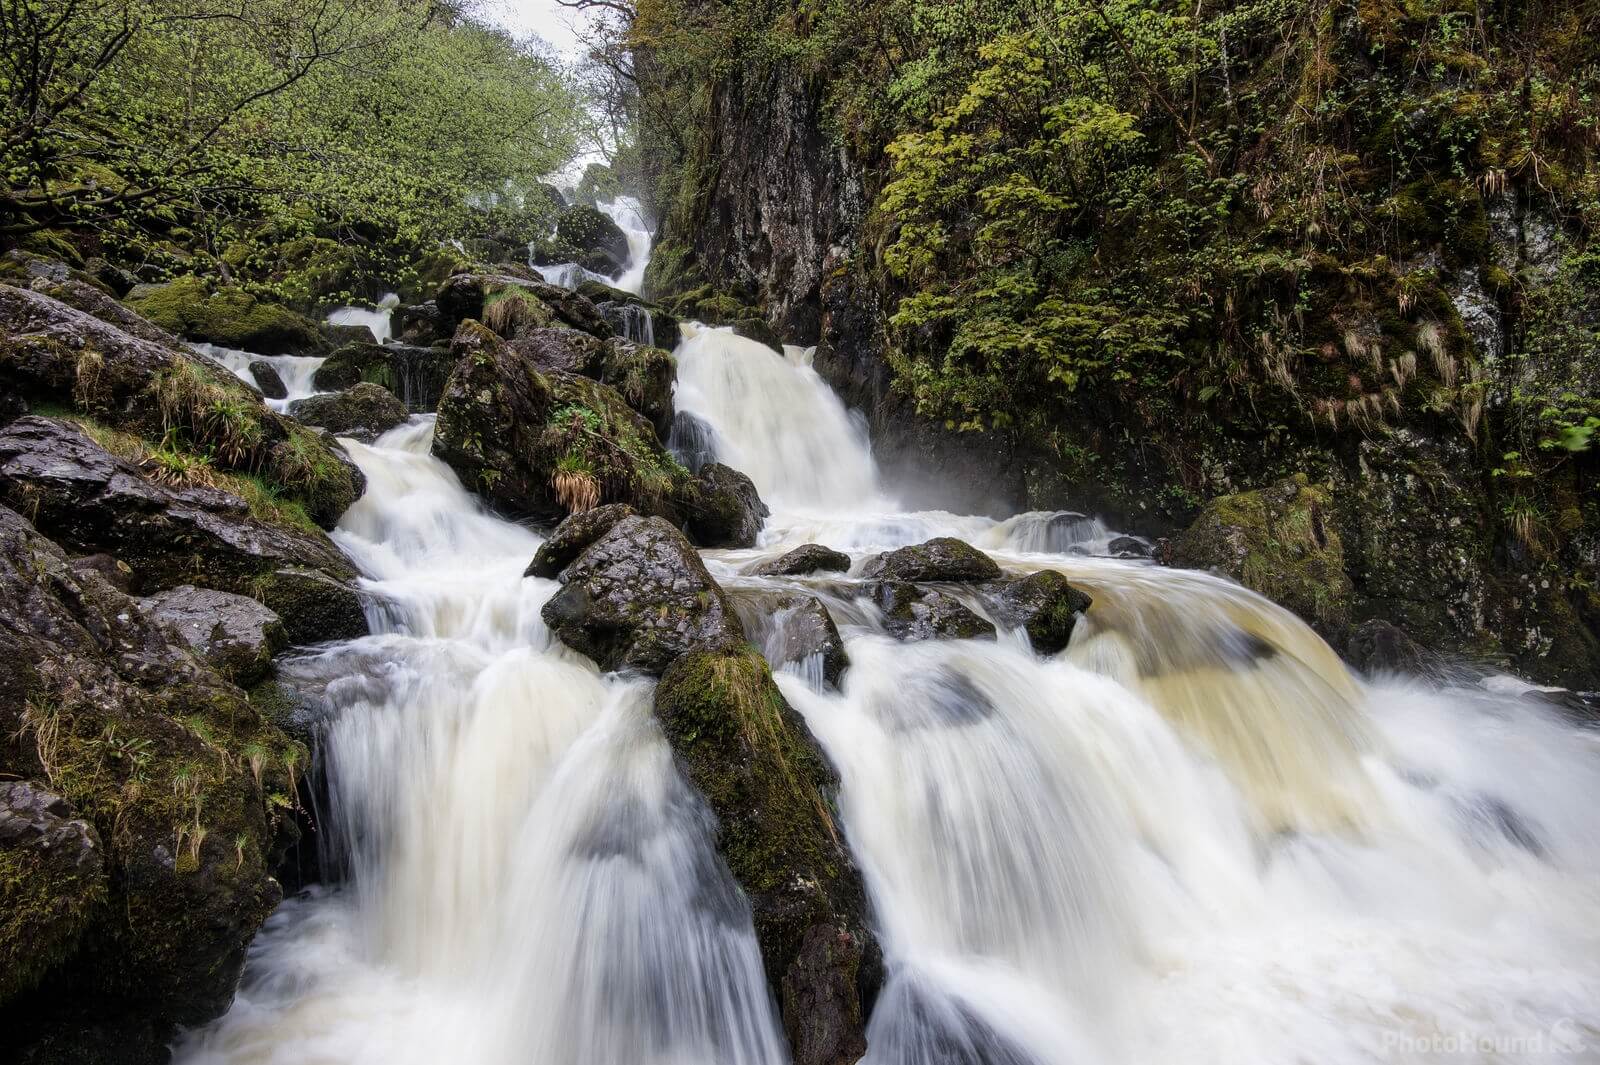 Image of Lodore Falls, Lake District by Richard Lizzimore